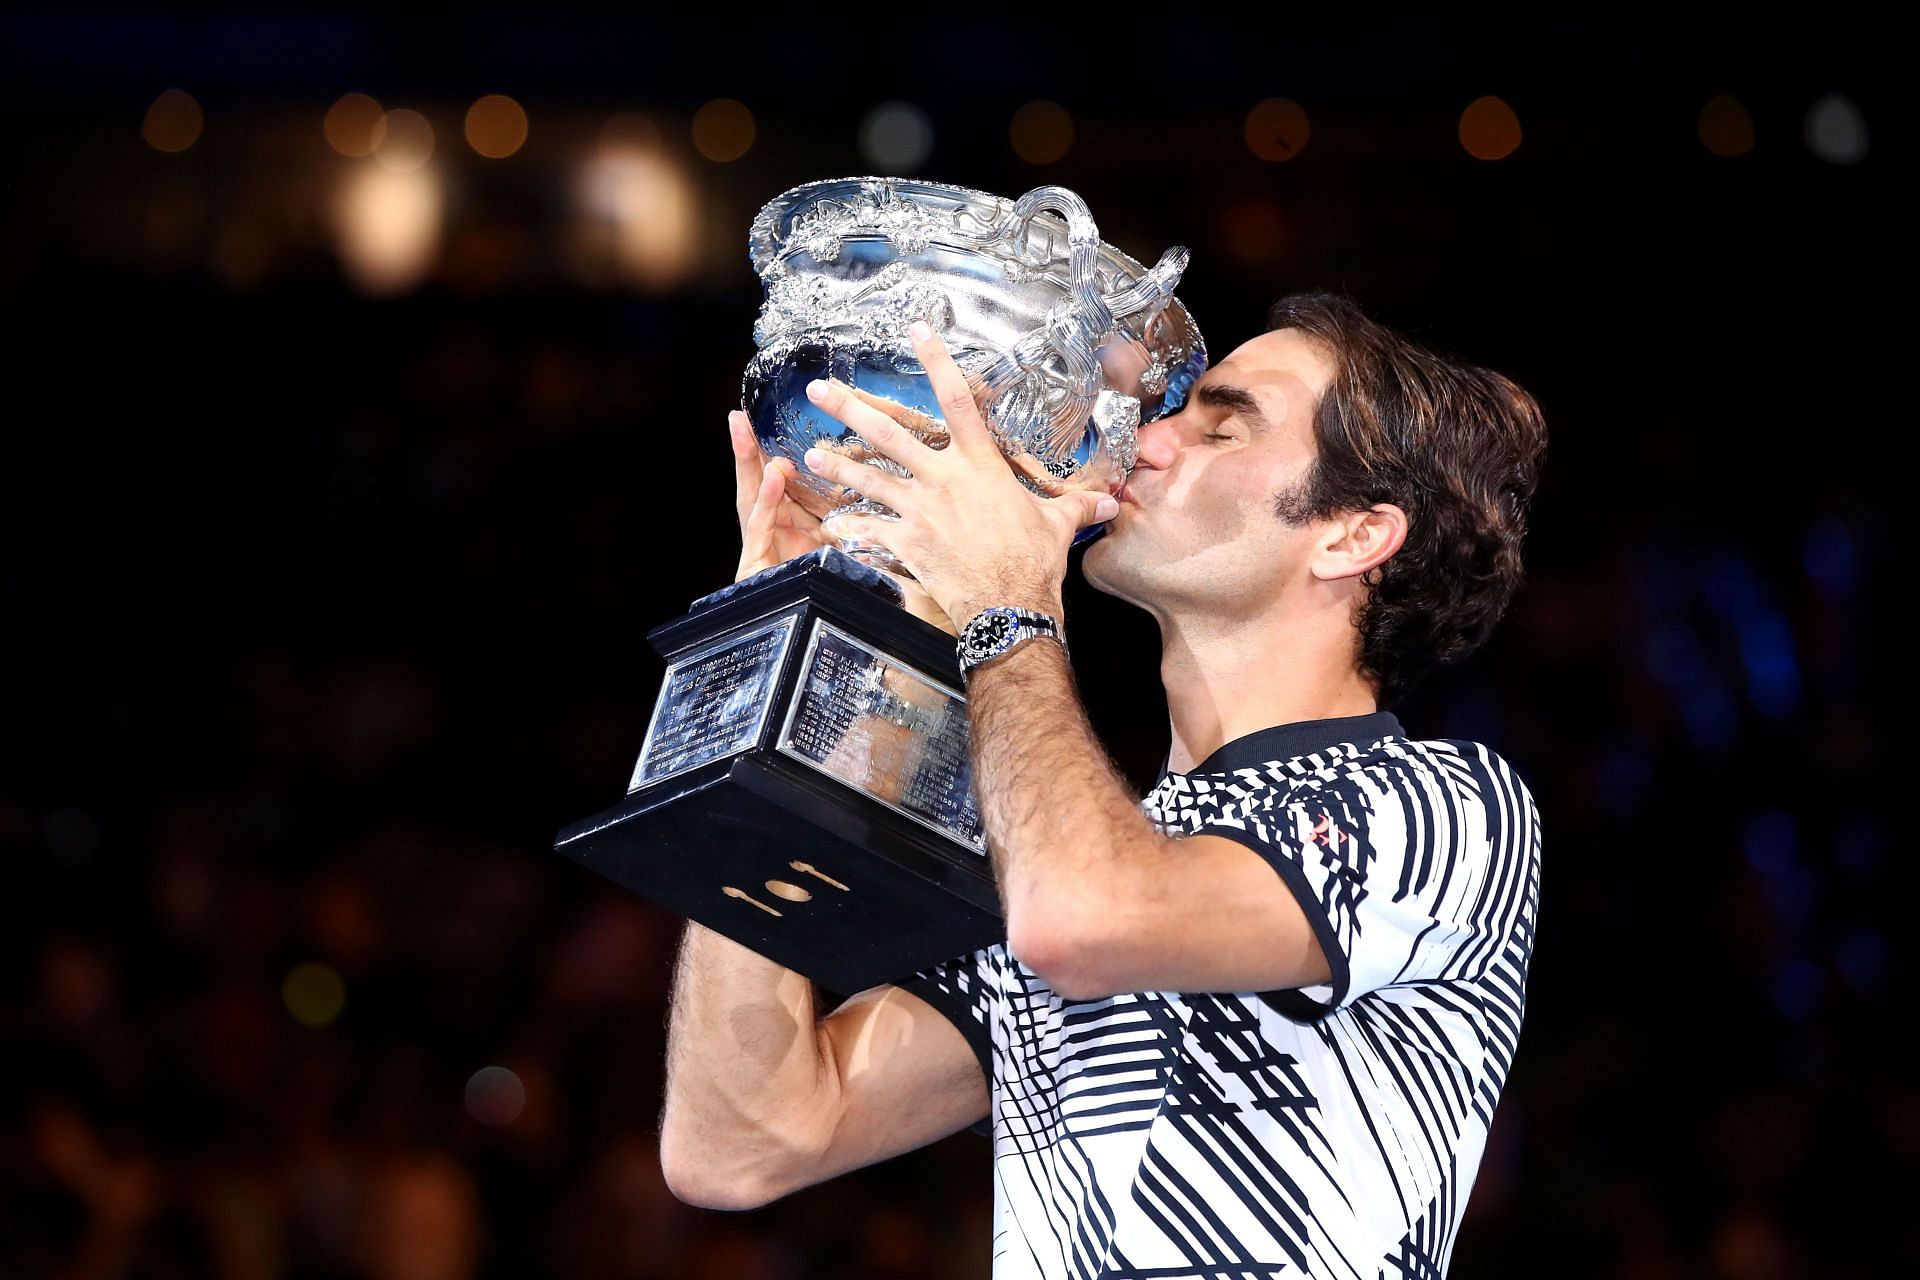 Roger Federer had to wait two more years after his 1000th match win to lift his 18th Grand Slam